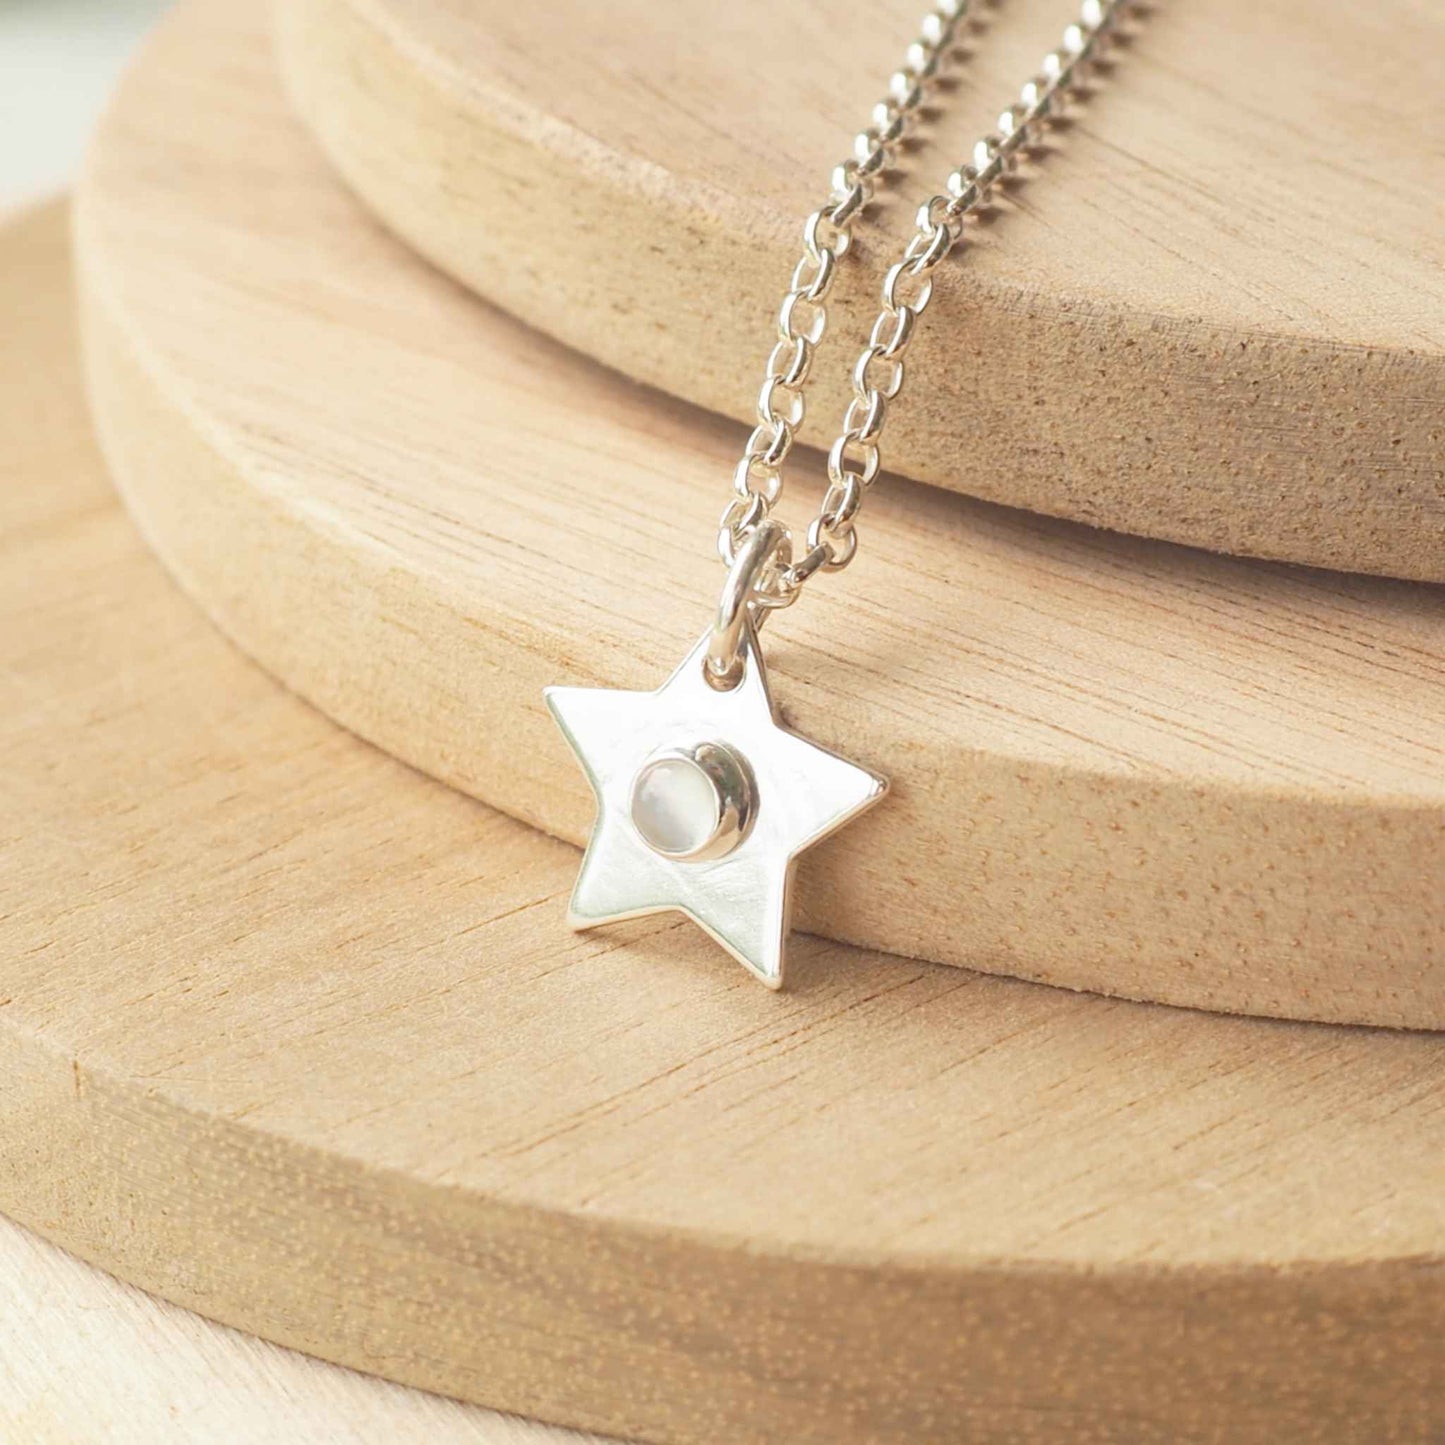 Silver Birthstone star charm pendant with June's birthstone as a centre. Sterling Silver and a round white moonstone gemstone. Handmade by a small jewellery in edinburgh UK